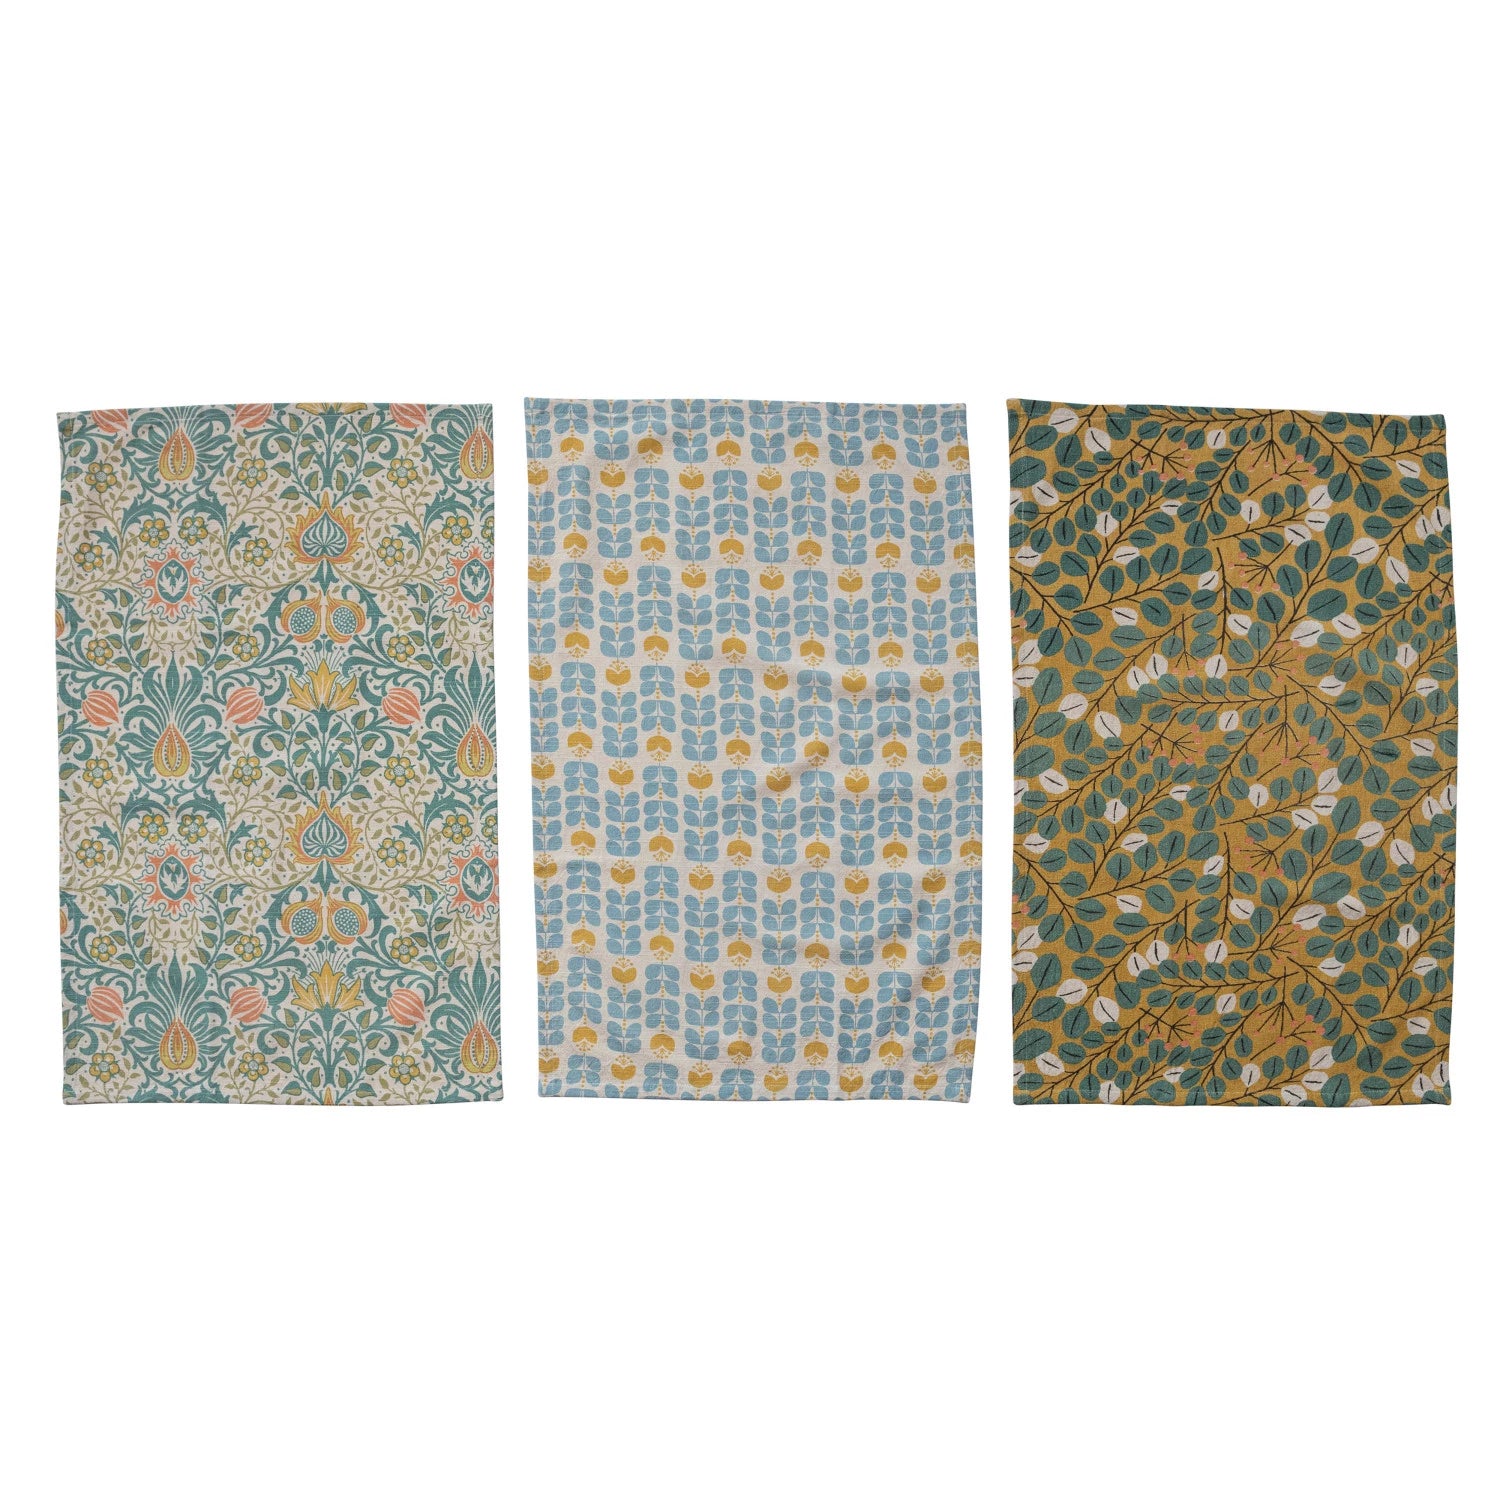 all three styles of botanical pattern cotton tea towels displayed against a white background